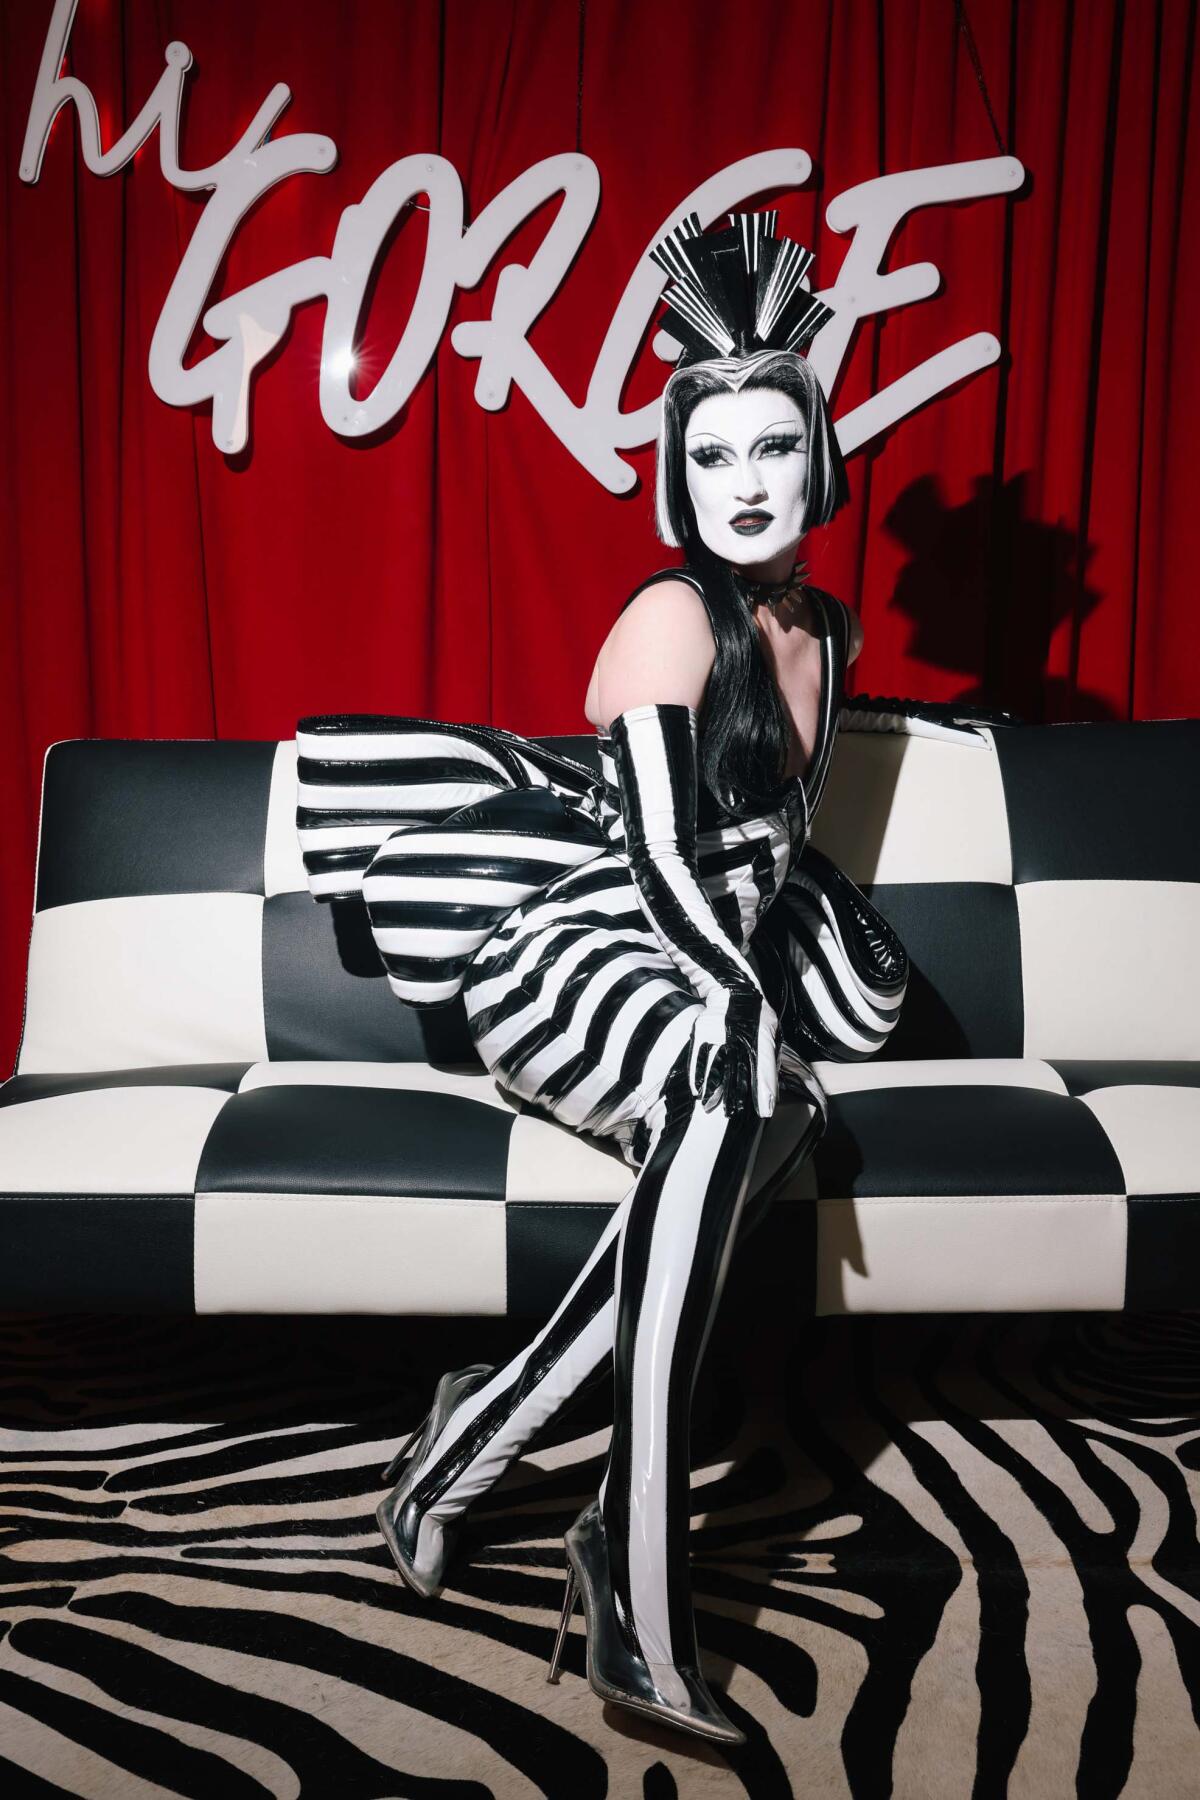 A person in a black-and-white striped dress sits on a checkered sofa on top of a zebra print rug.